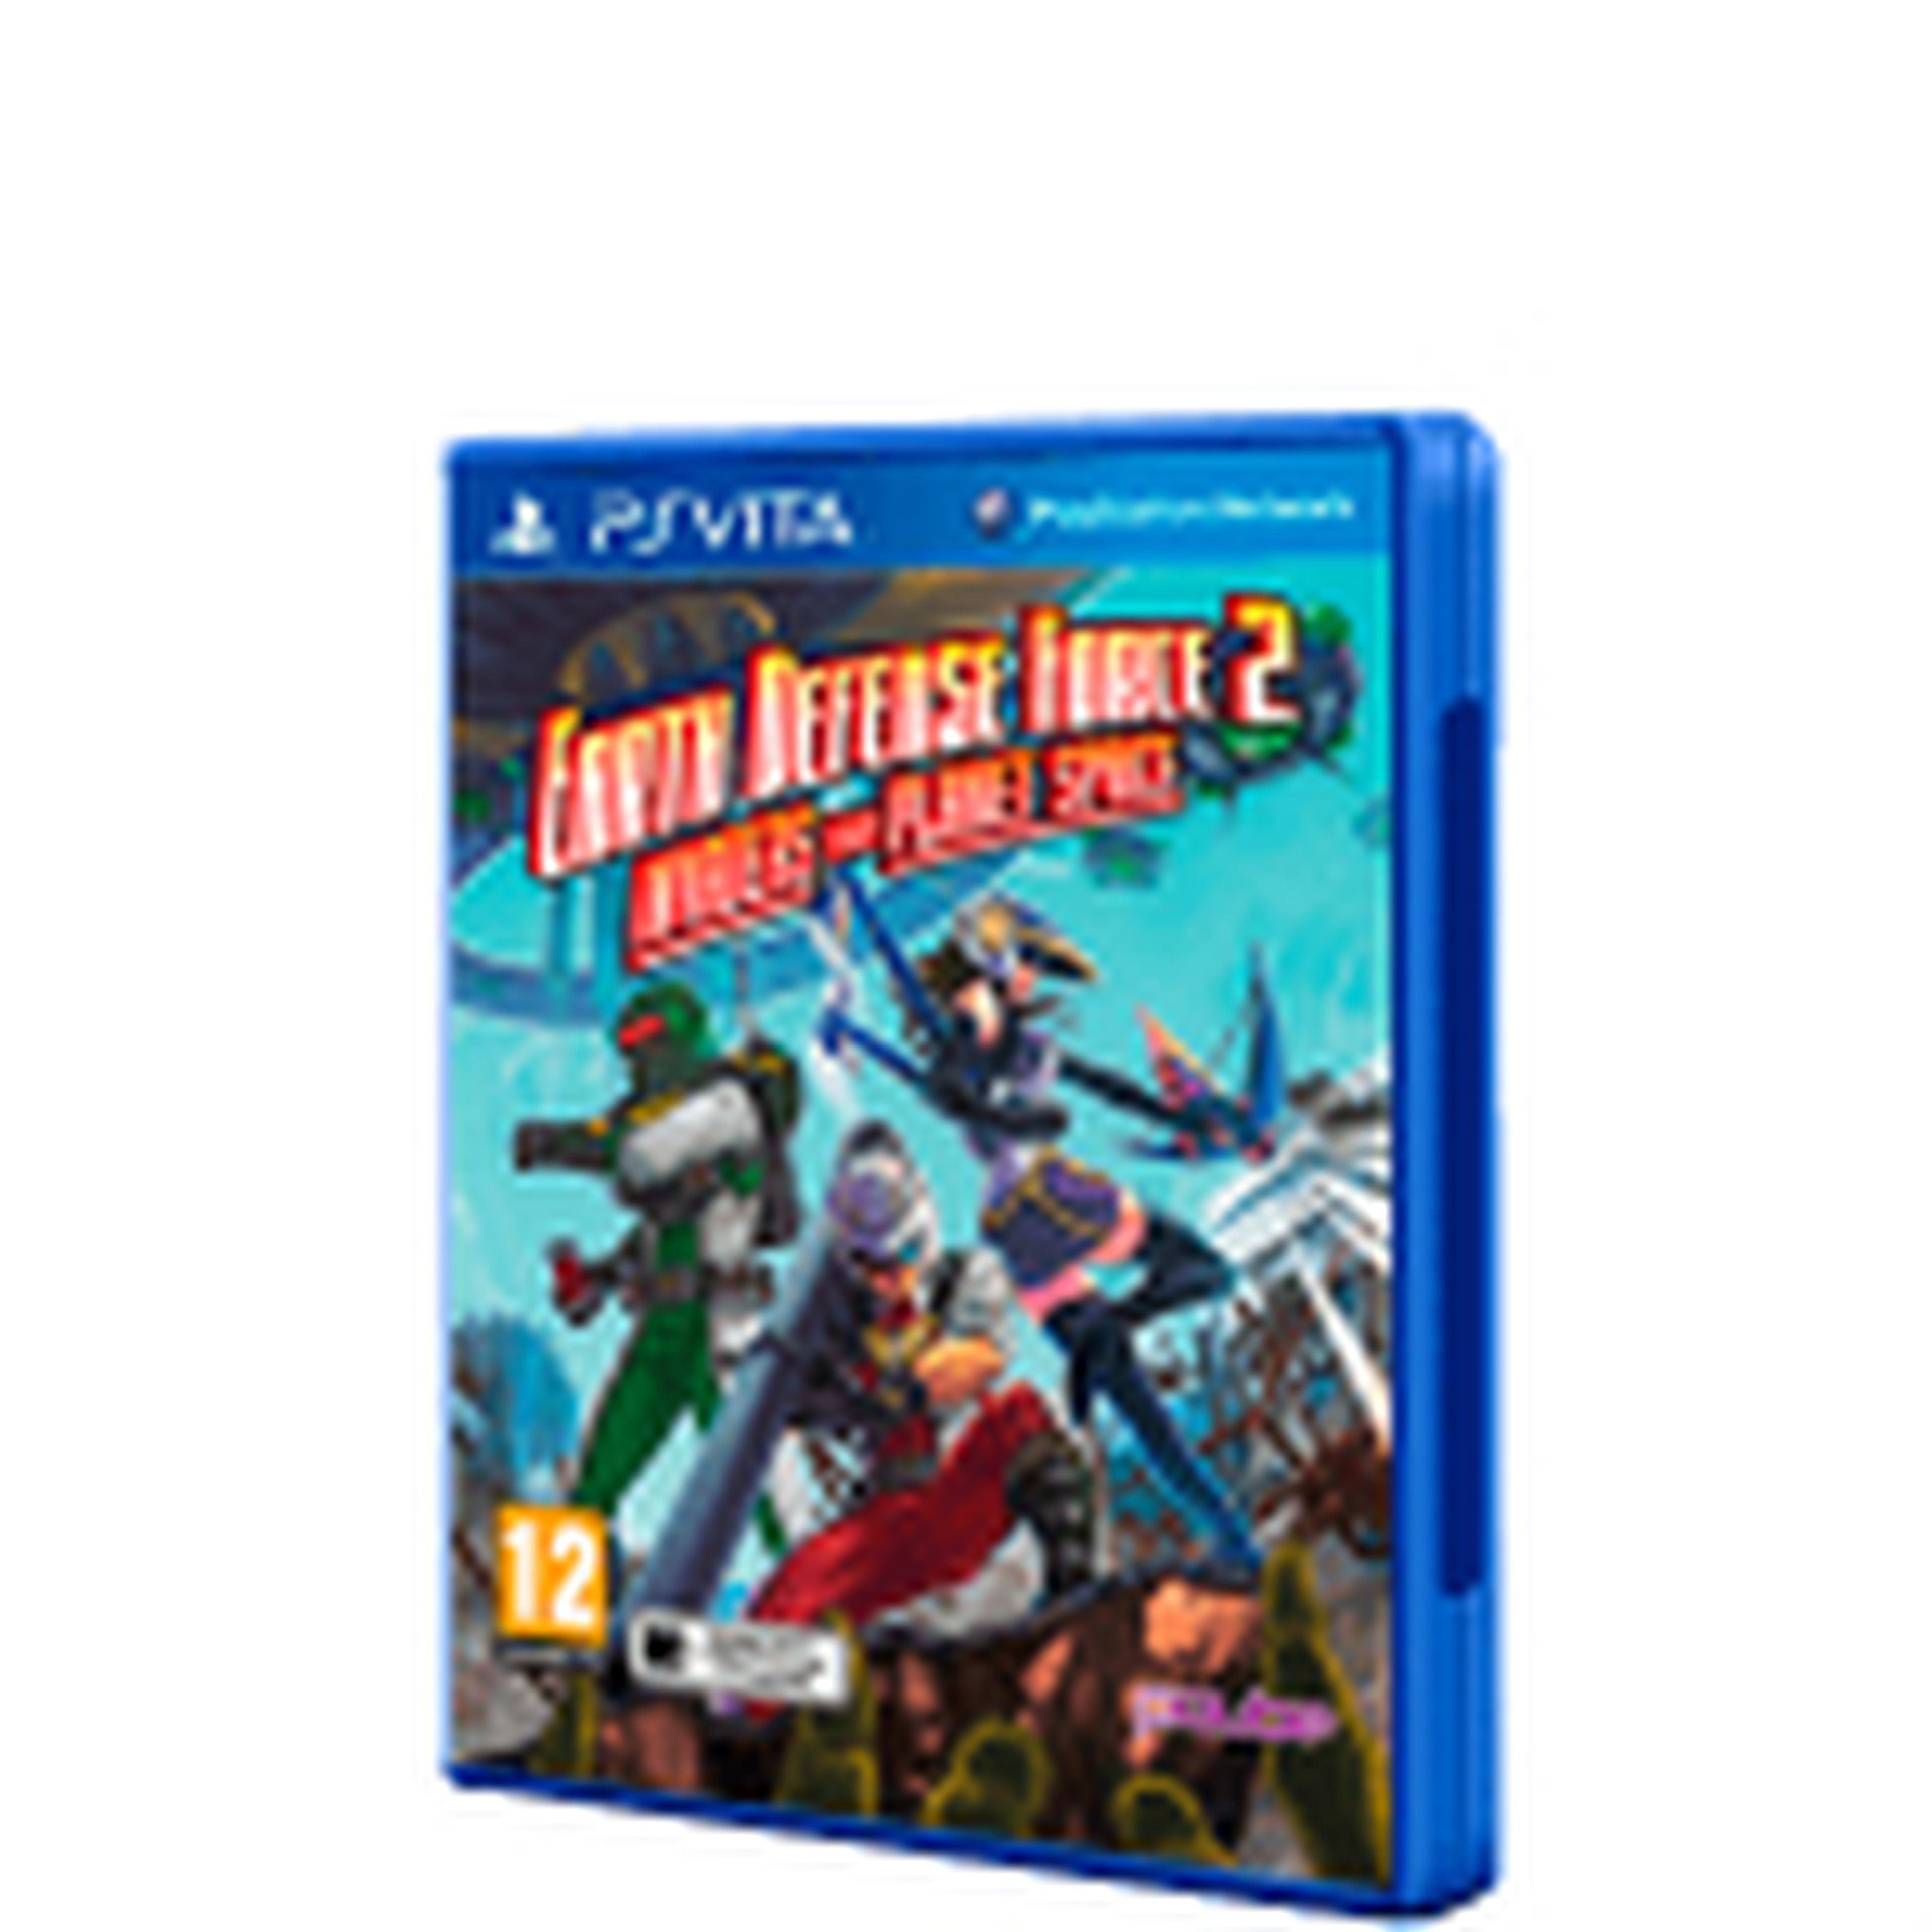 Earth Defense Force 2: Invaders From Planet Space para PS Vita